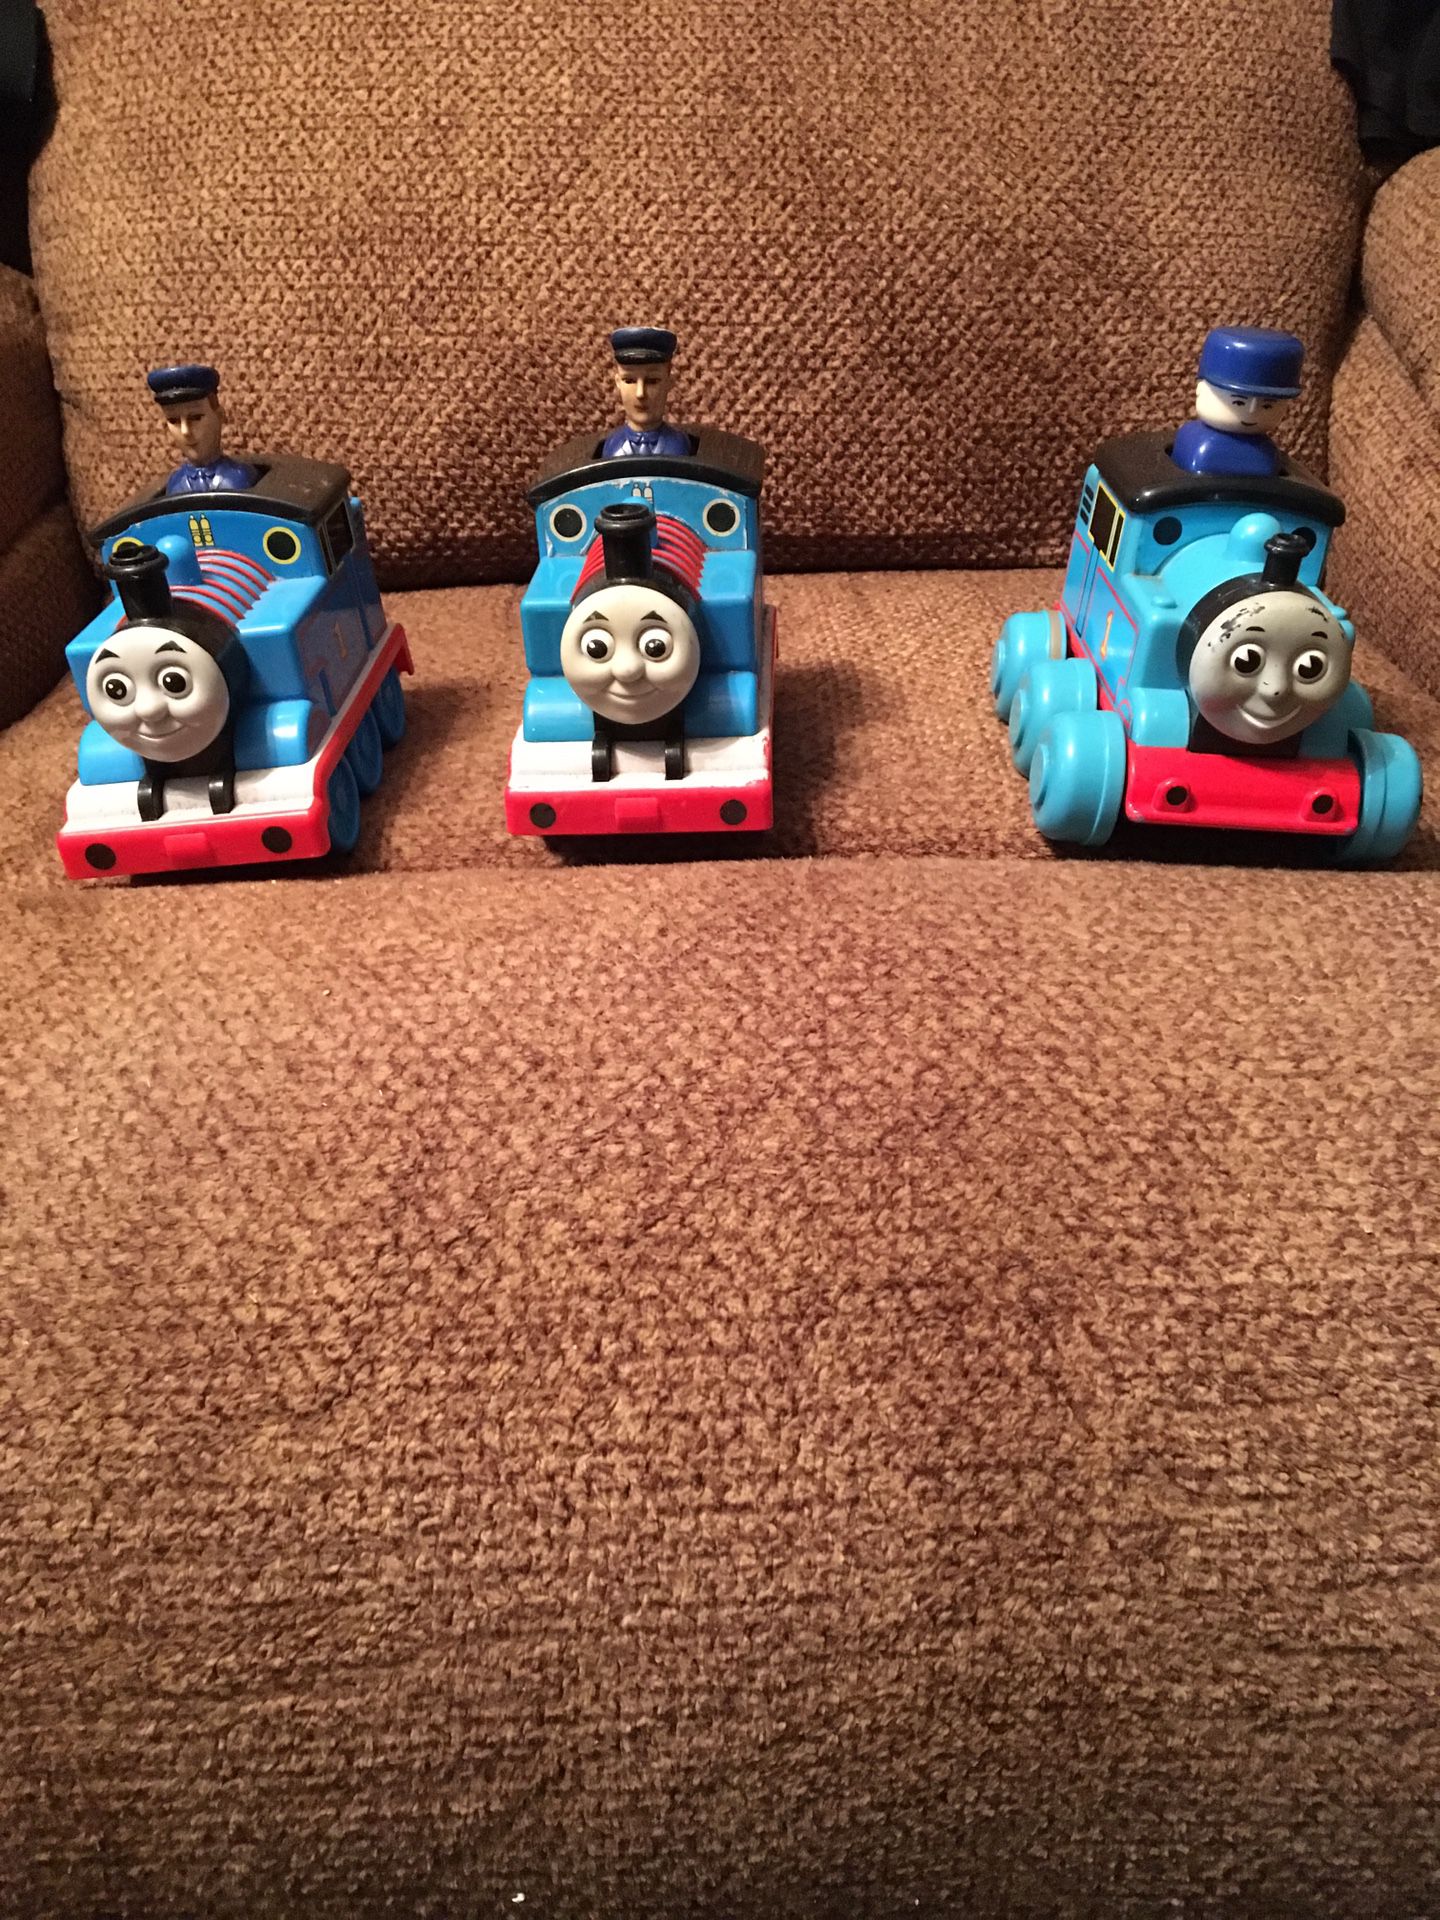 Thomas toy engine train $10 for all them